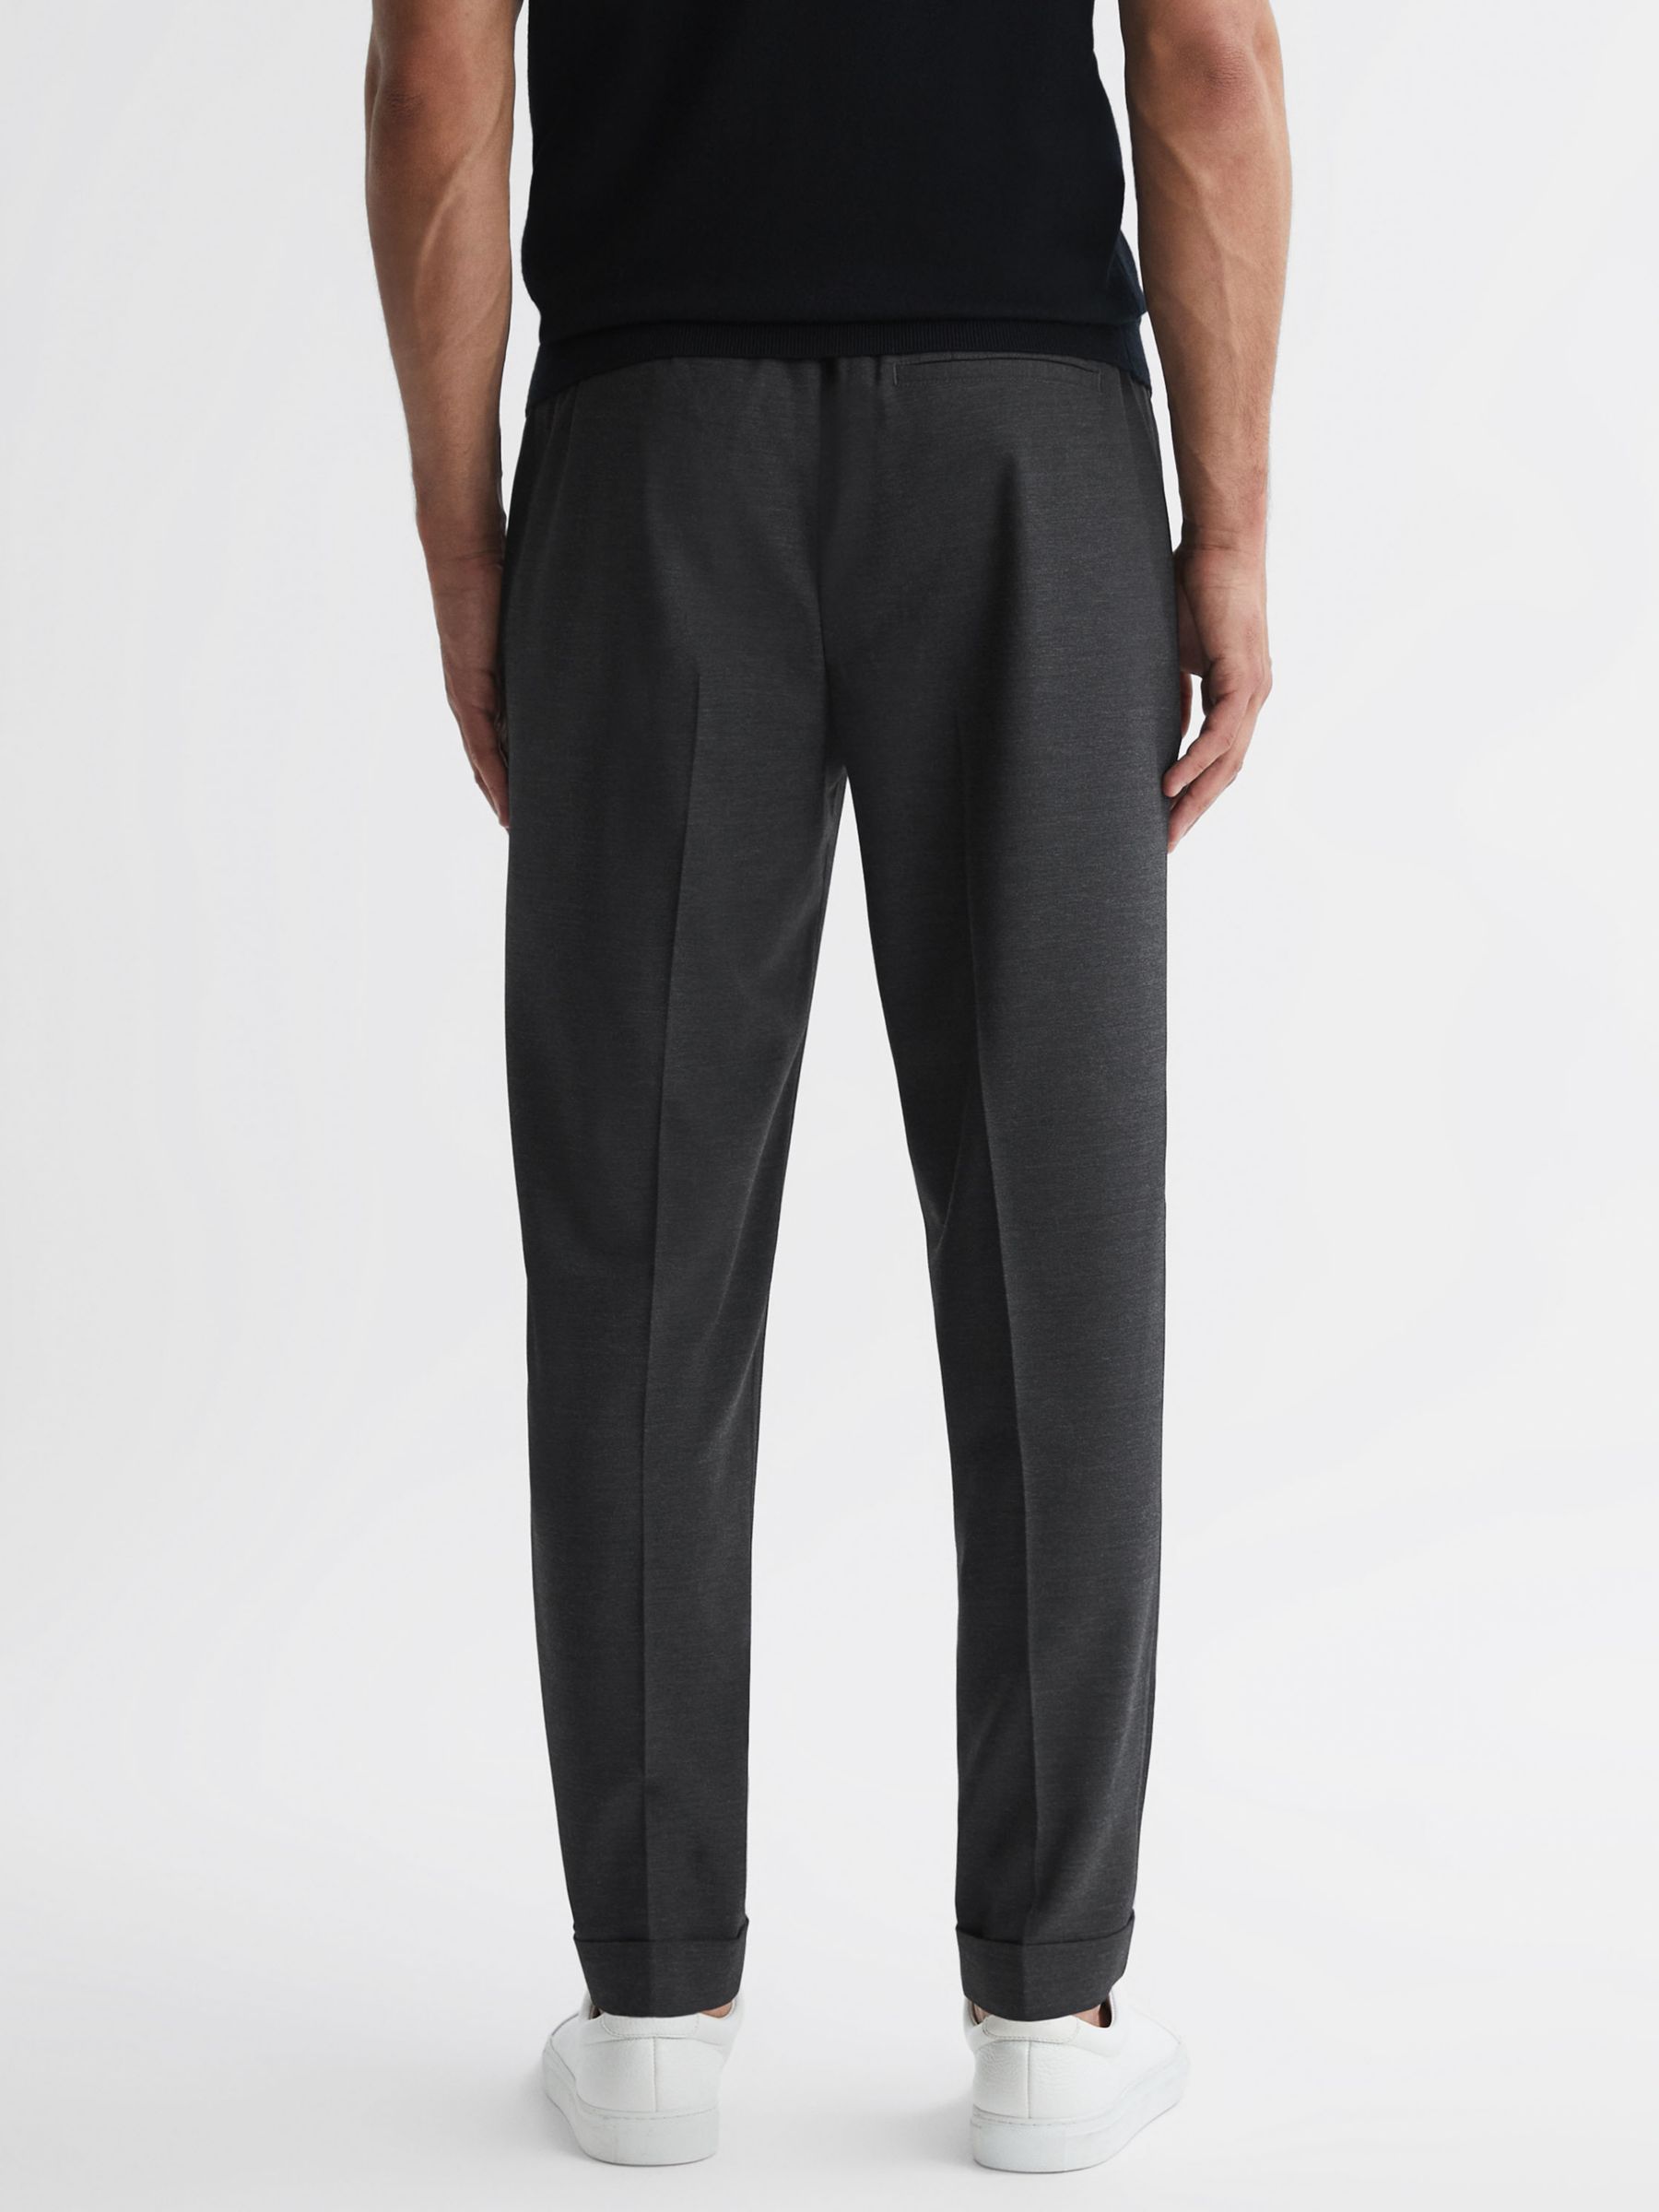 Reiss Brighton Pleated Relaxed Trousers, Charcoal at John Lewis & Partners